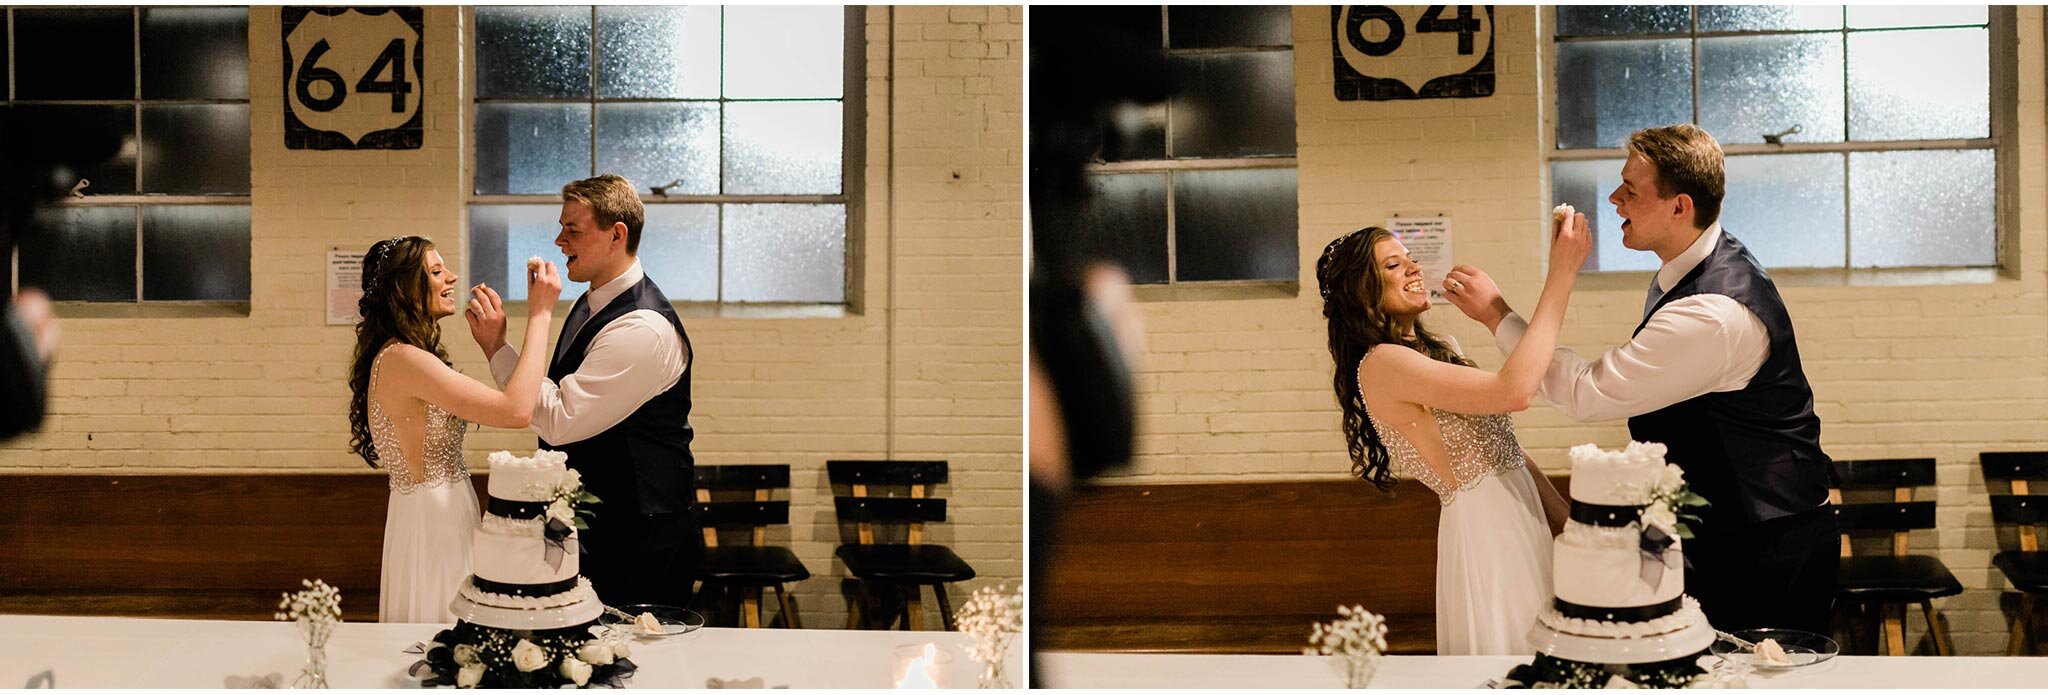 Durham Wedding Photographer | By G. Lin Photography | Bride and groom feeding wedding cake to each other